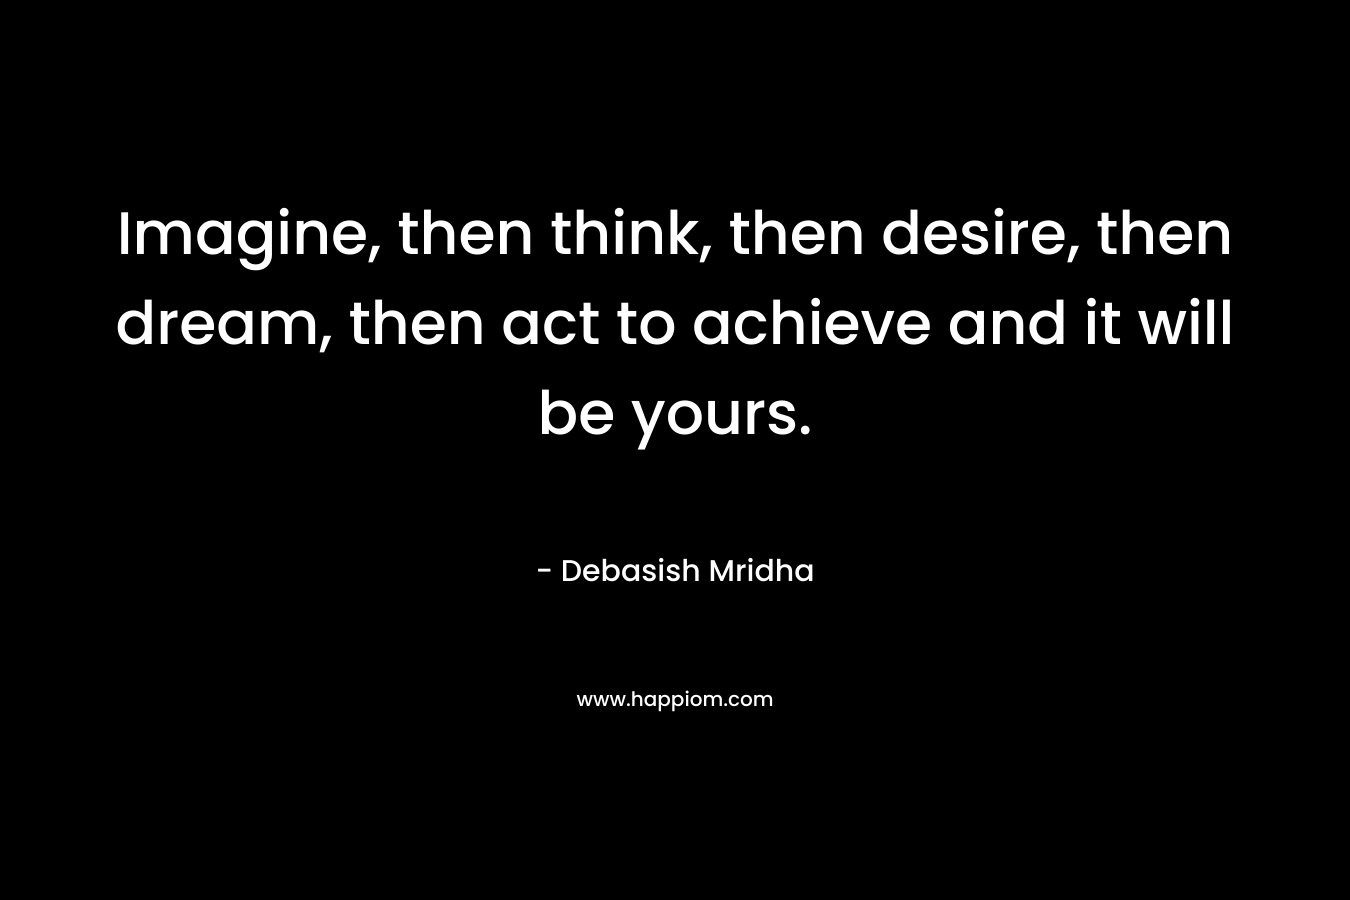 Imagine, then think, then desire, then dream, then act to achieve and it will be yours.